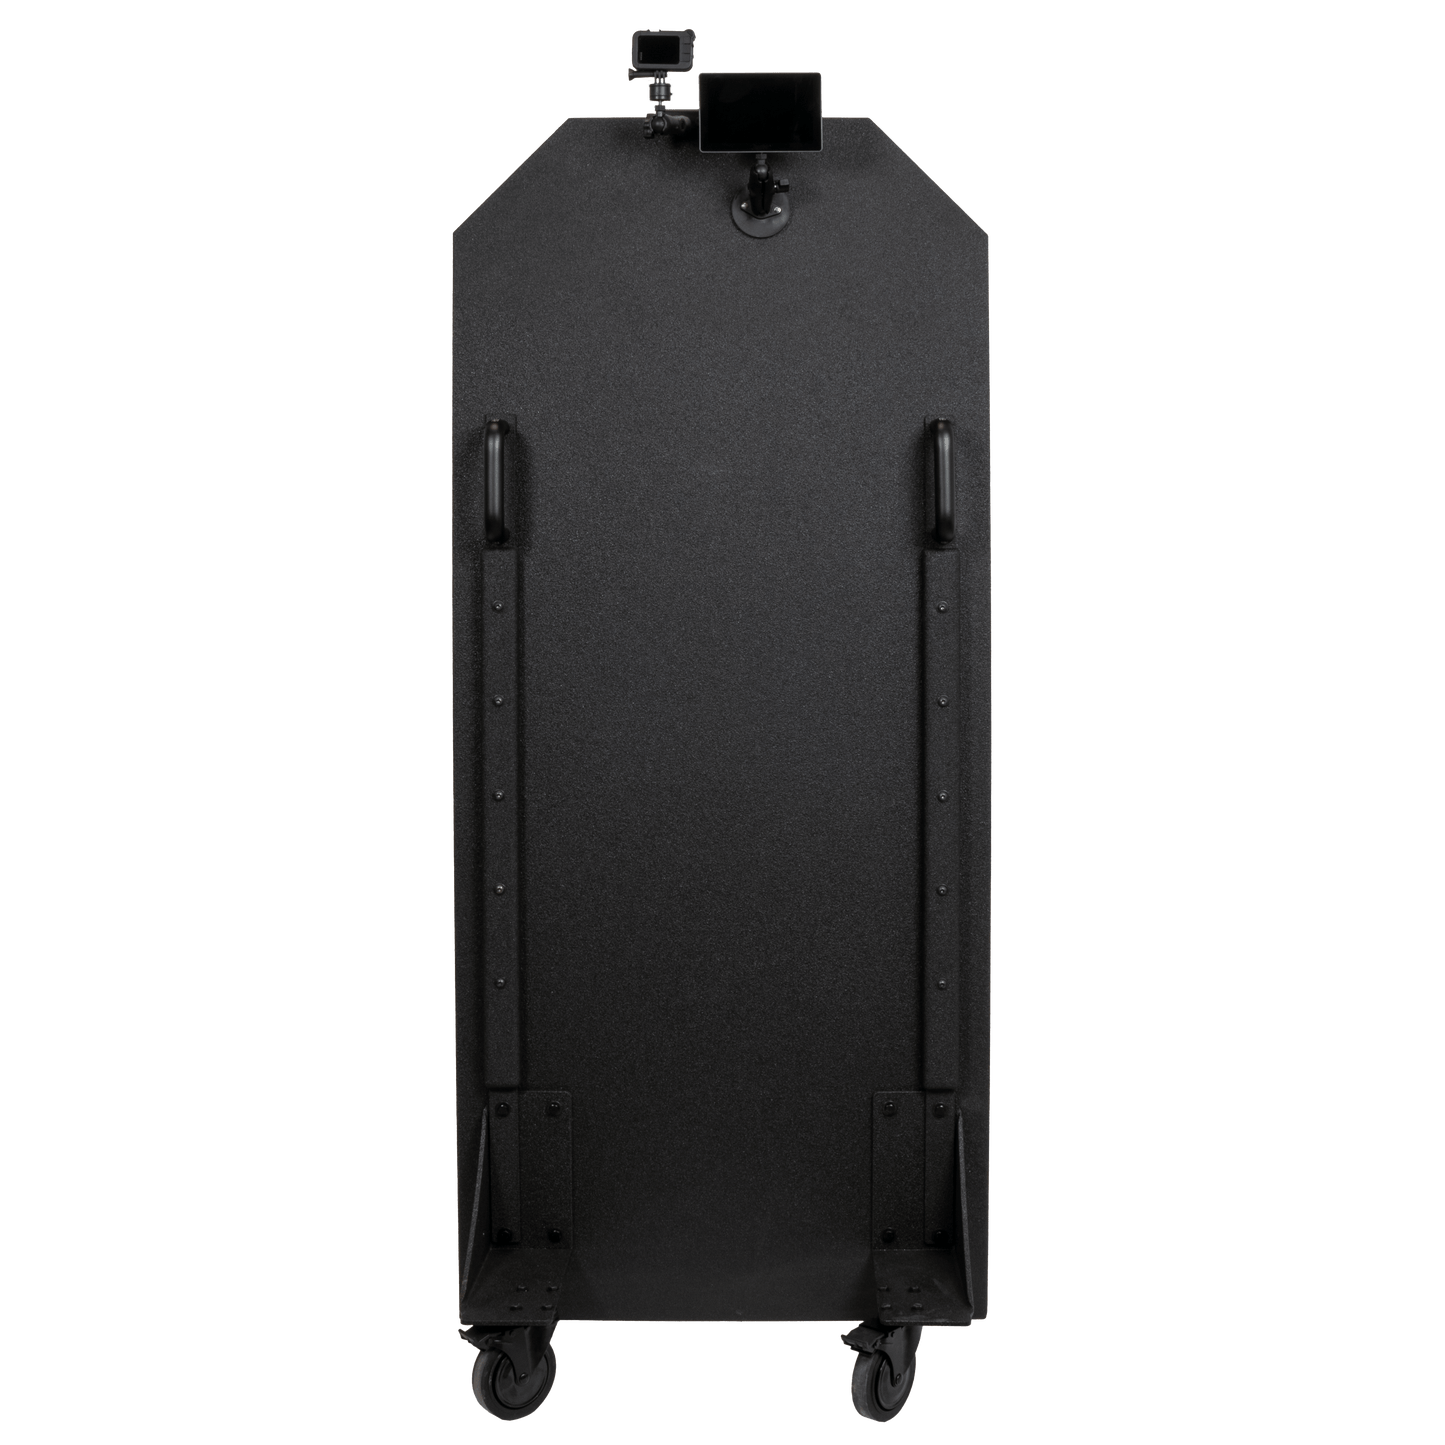 RTS Tactical Ballistic Level III+ Tactical Partition Panel